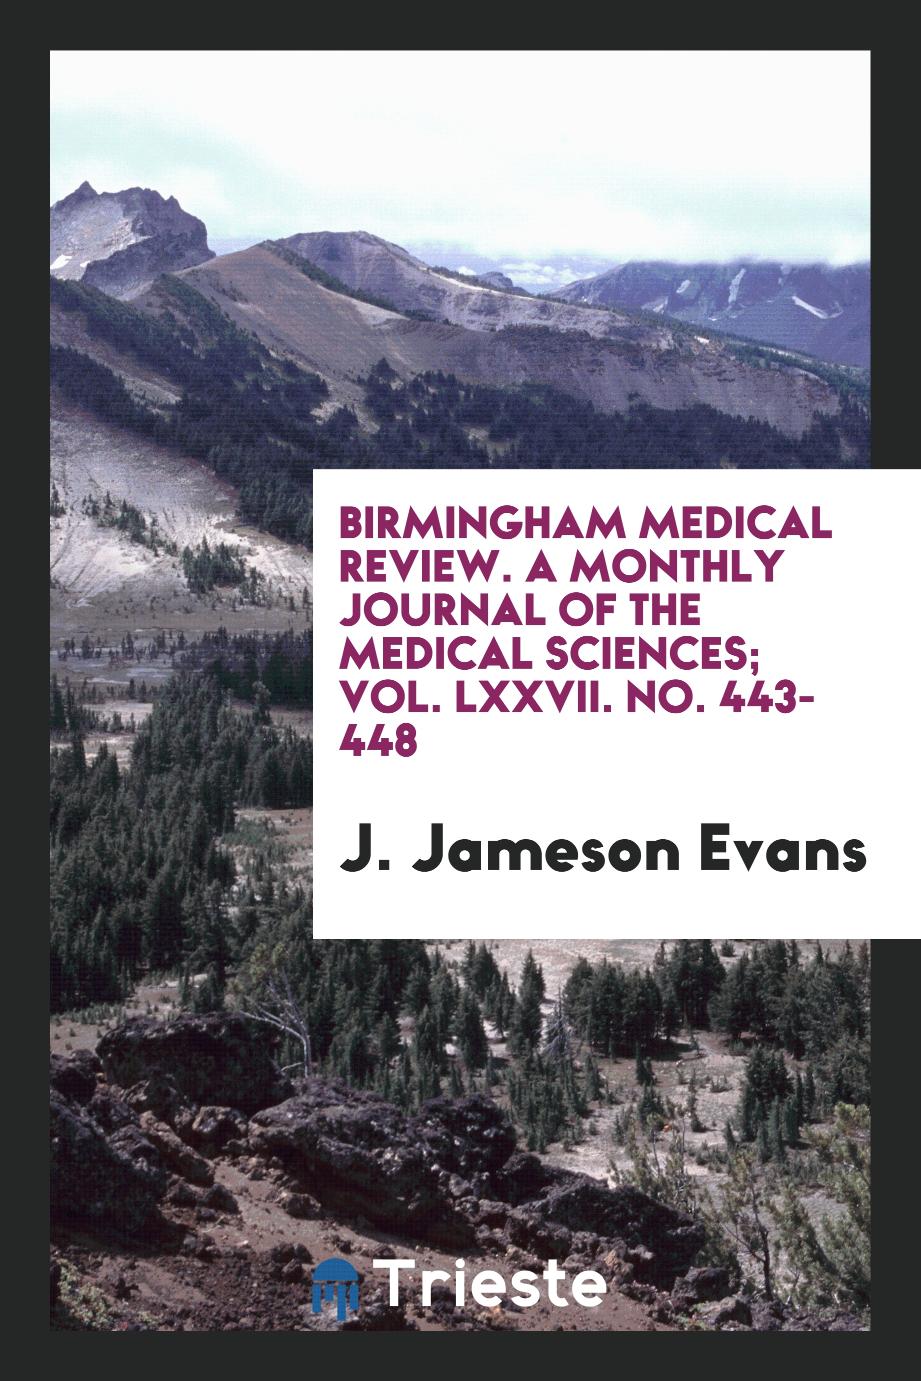 Birmingham Medical Review. A monthly journal of the medical sciences; Vol. LXXVII. No. 443-448